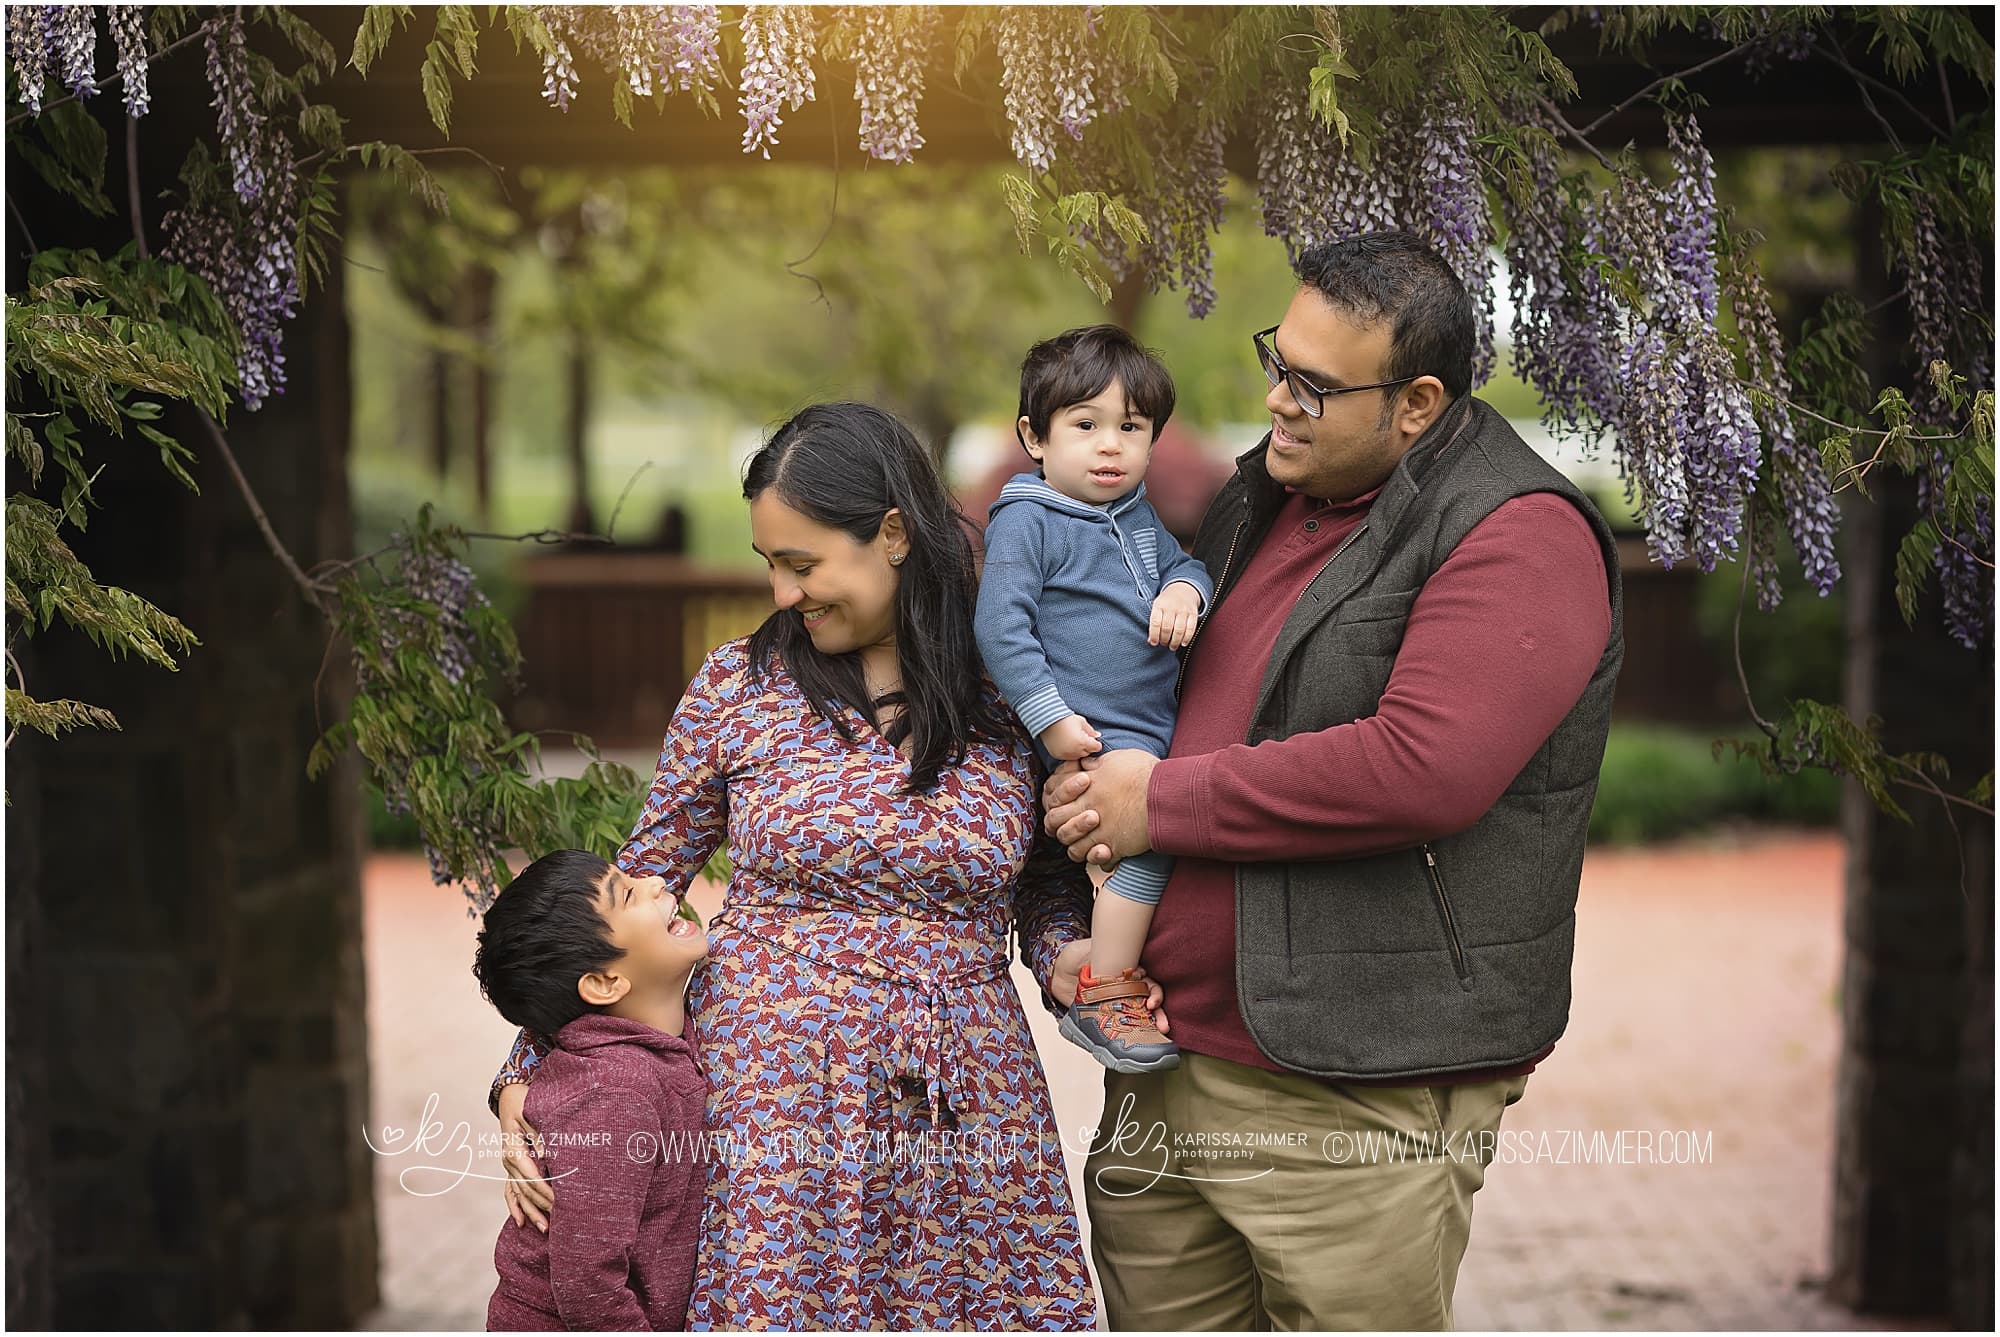 Family photographed together at their outdoor family photo session in Hershey PA